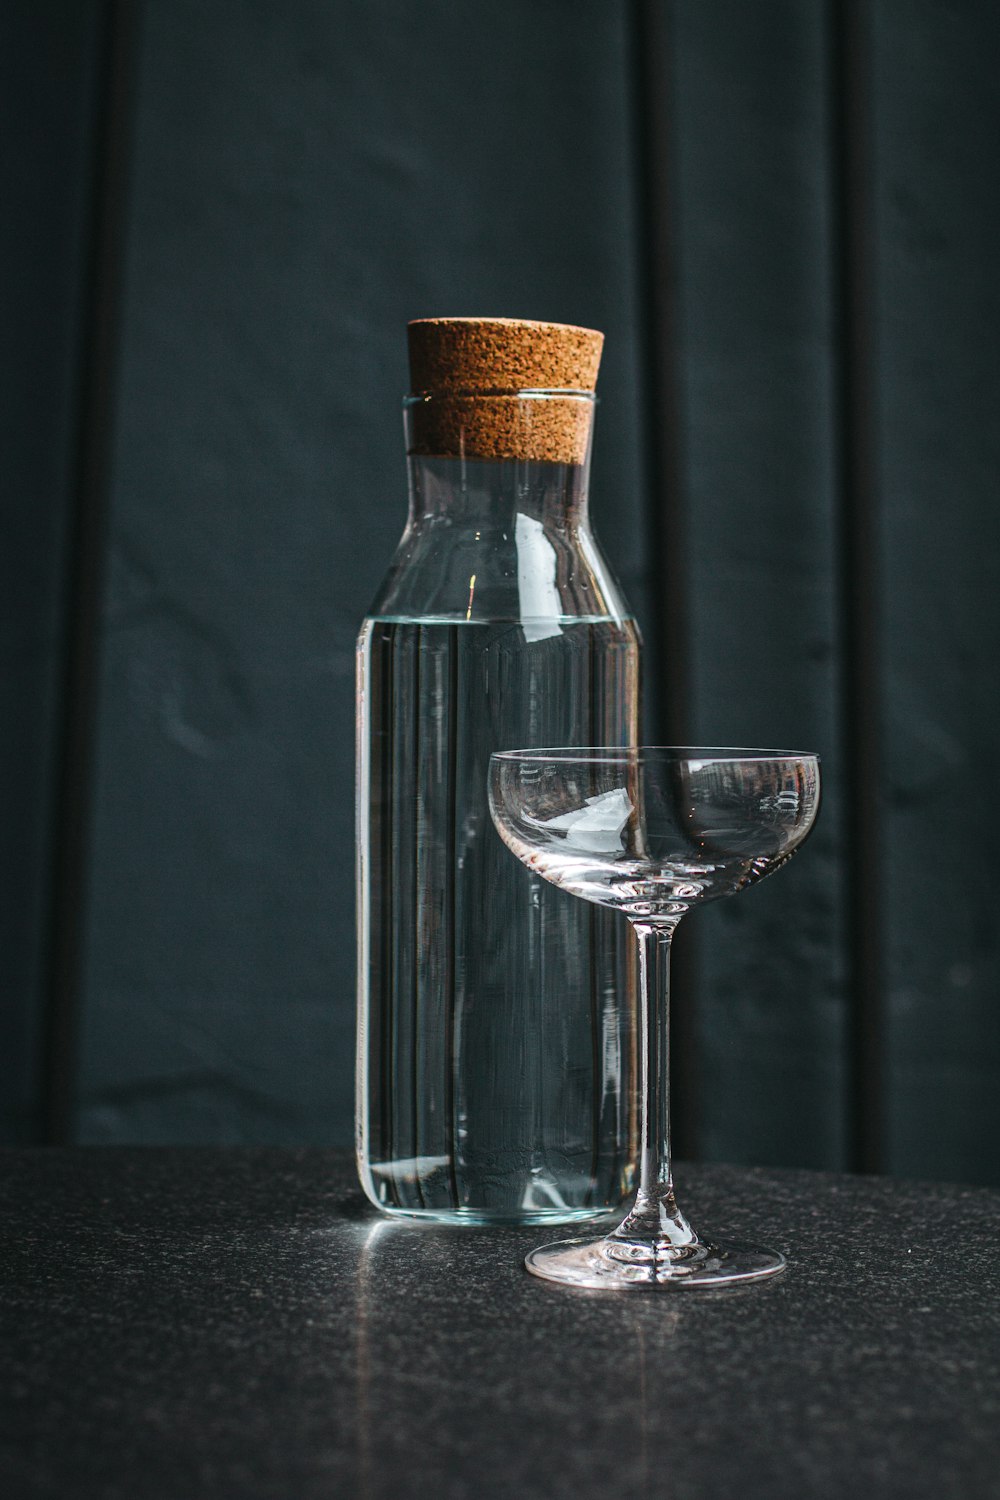 clear glass jar with cork stopper